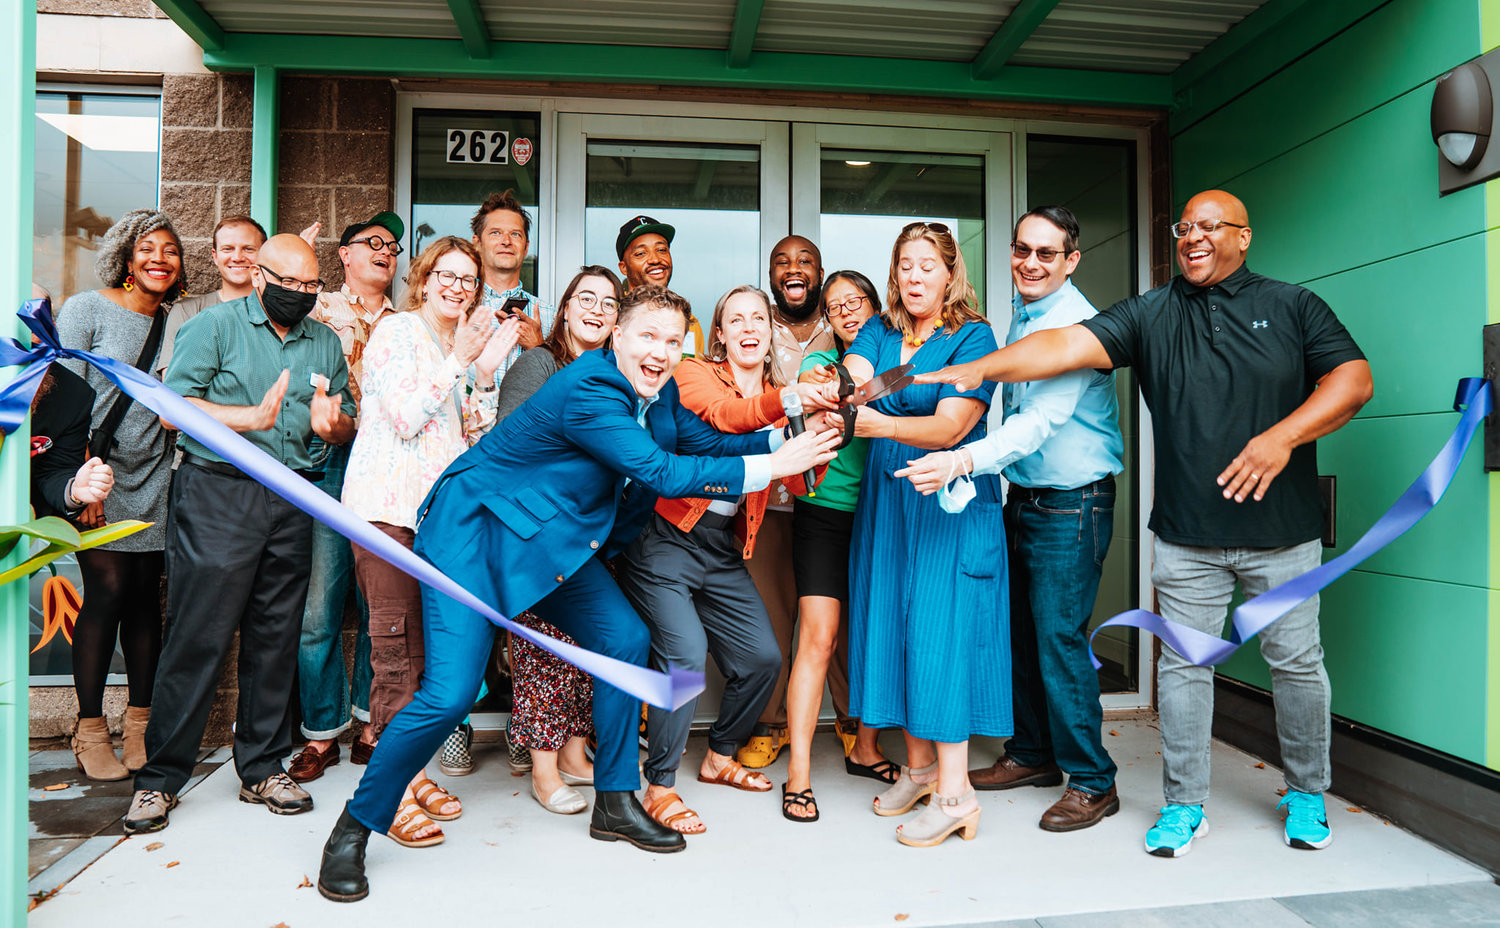 In October 2021, Springboard for the Arts officially reopened its building at 262 University Ave. with a grand celebration. The community hall and front yard are available for rental. (Photos courtesy of Springboard for the Arts)